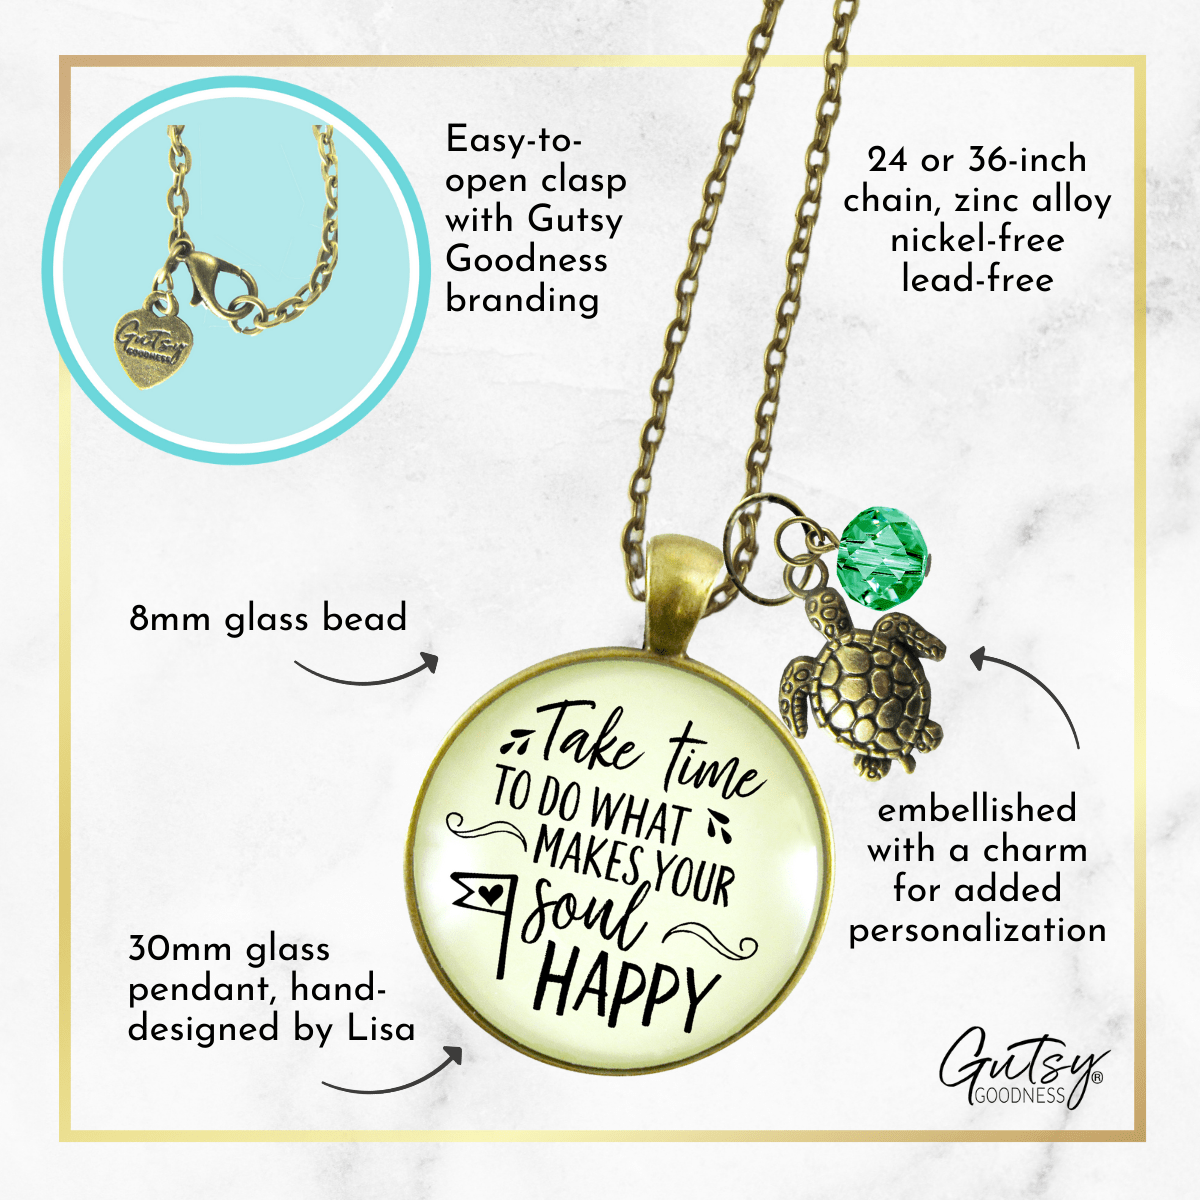 Gutsy Goodness Turtle Necklace Take Time to Make Soul Happy Life Theme Jewelry - Gutsy Goodness Handmade Jewelry;Turtle Necklace Take Time To Make Soul Happy Life Theme Jewelry - Gutsy Goodness Handmade Jewelry Gifts